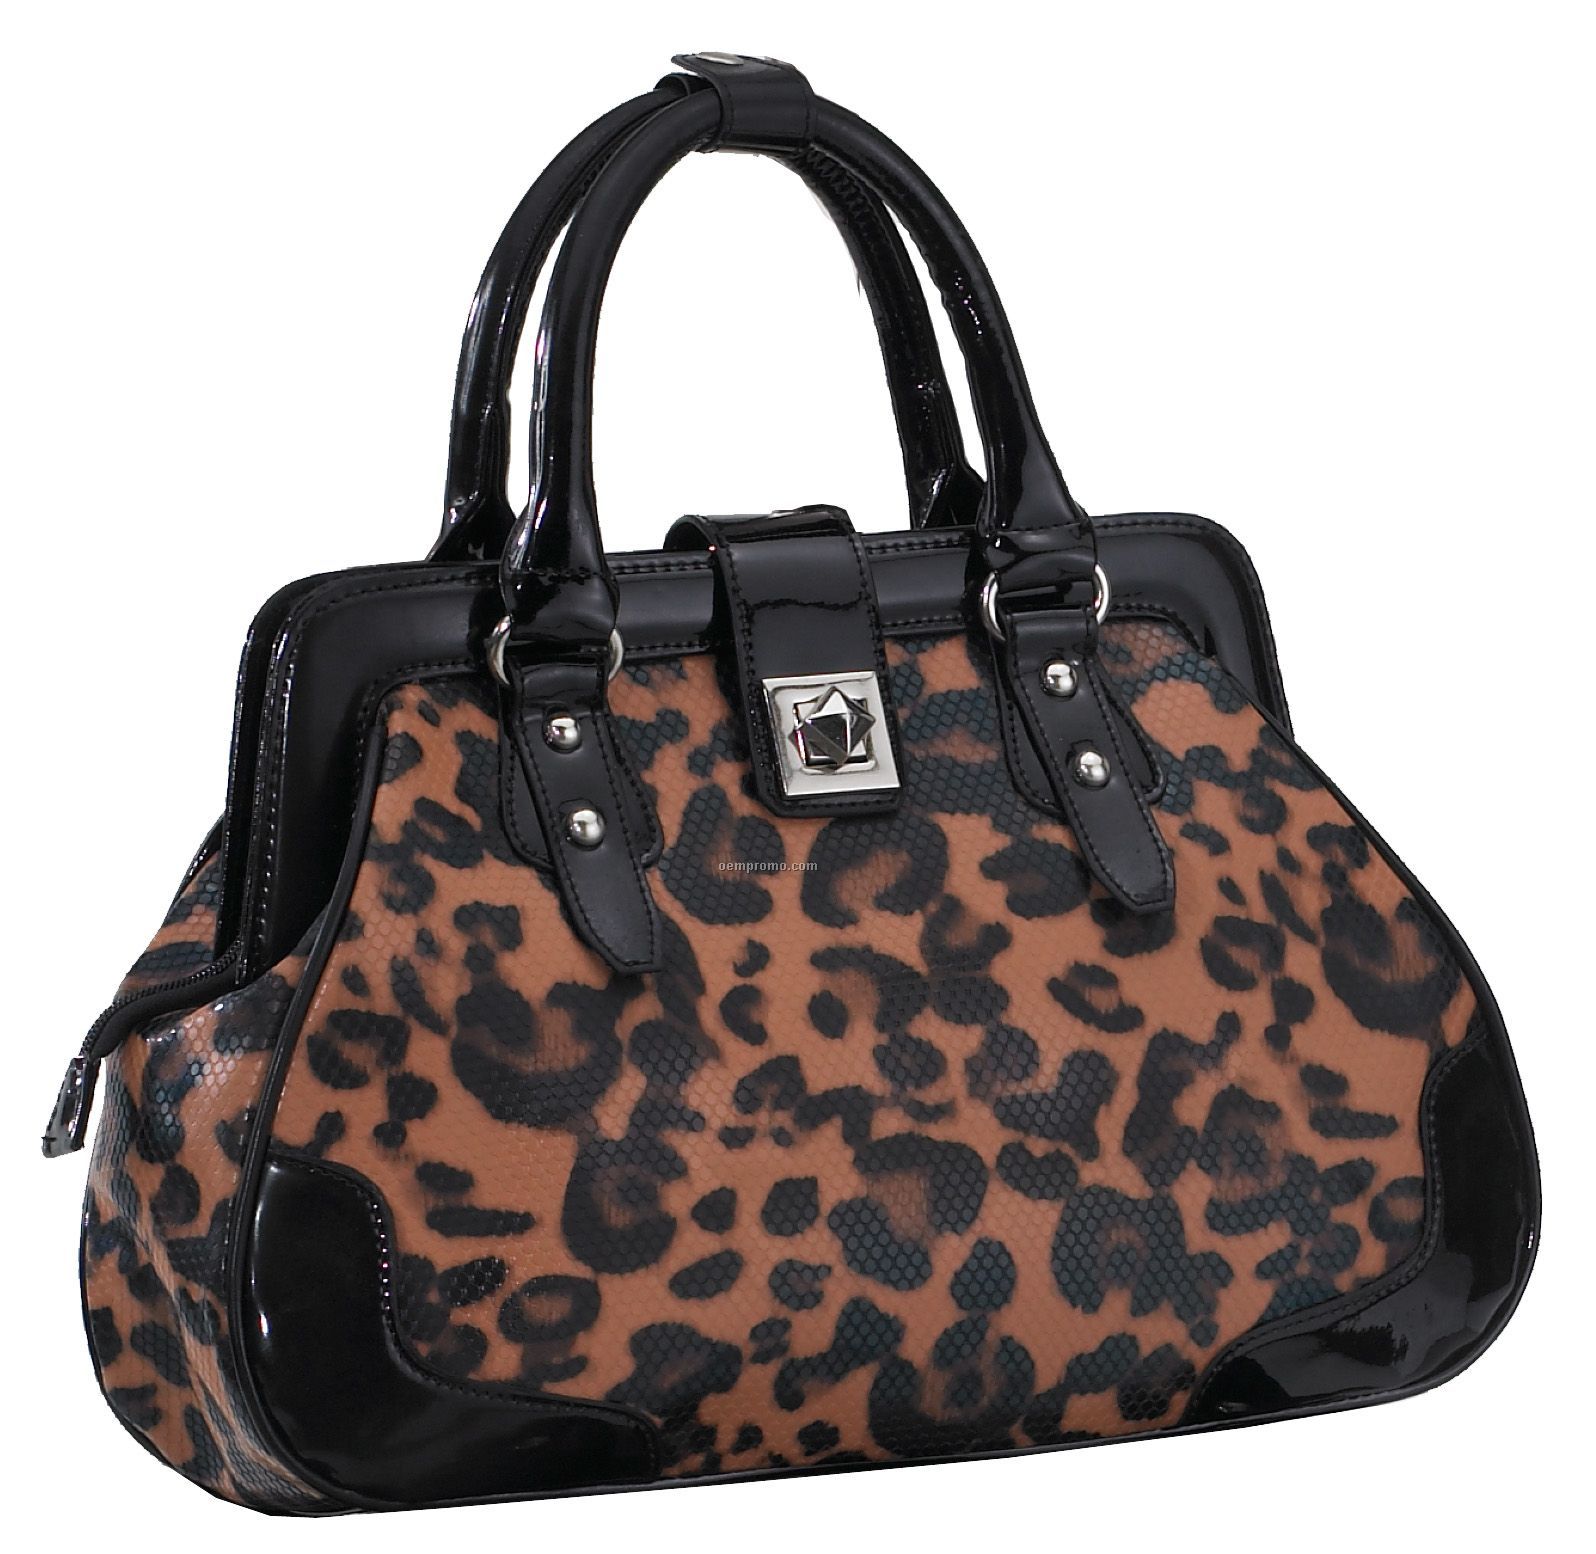 Matching Tote Bag - Leopard Pattern